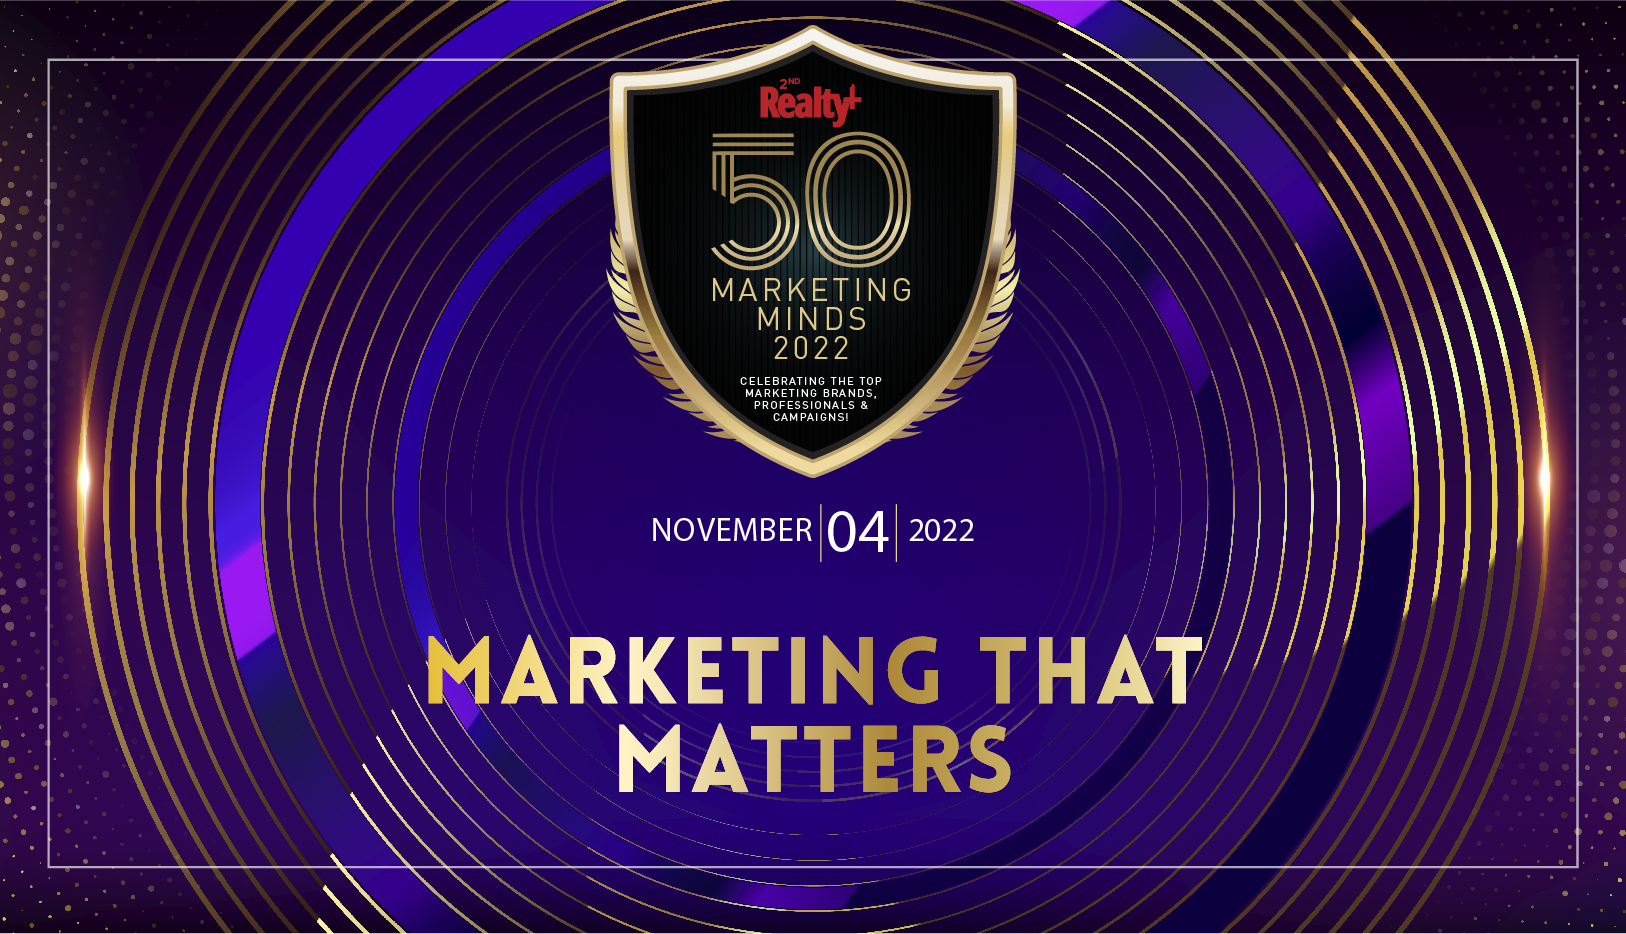 Join Tomm: The Marketing Mavericks at Realty+ Top50 Marketing Minds Conclave & Awards 2022